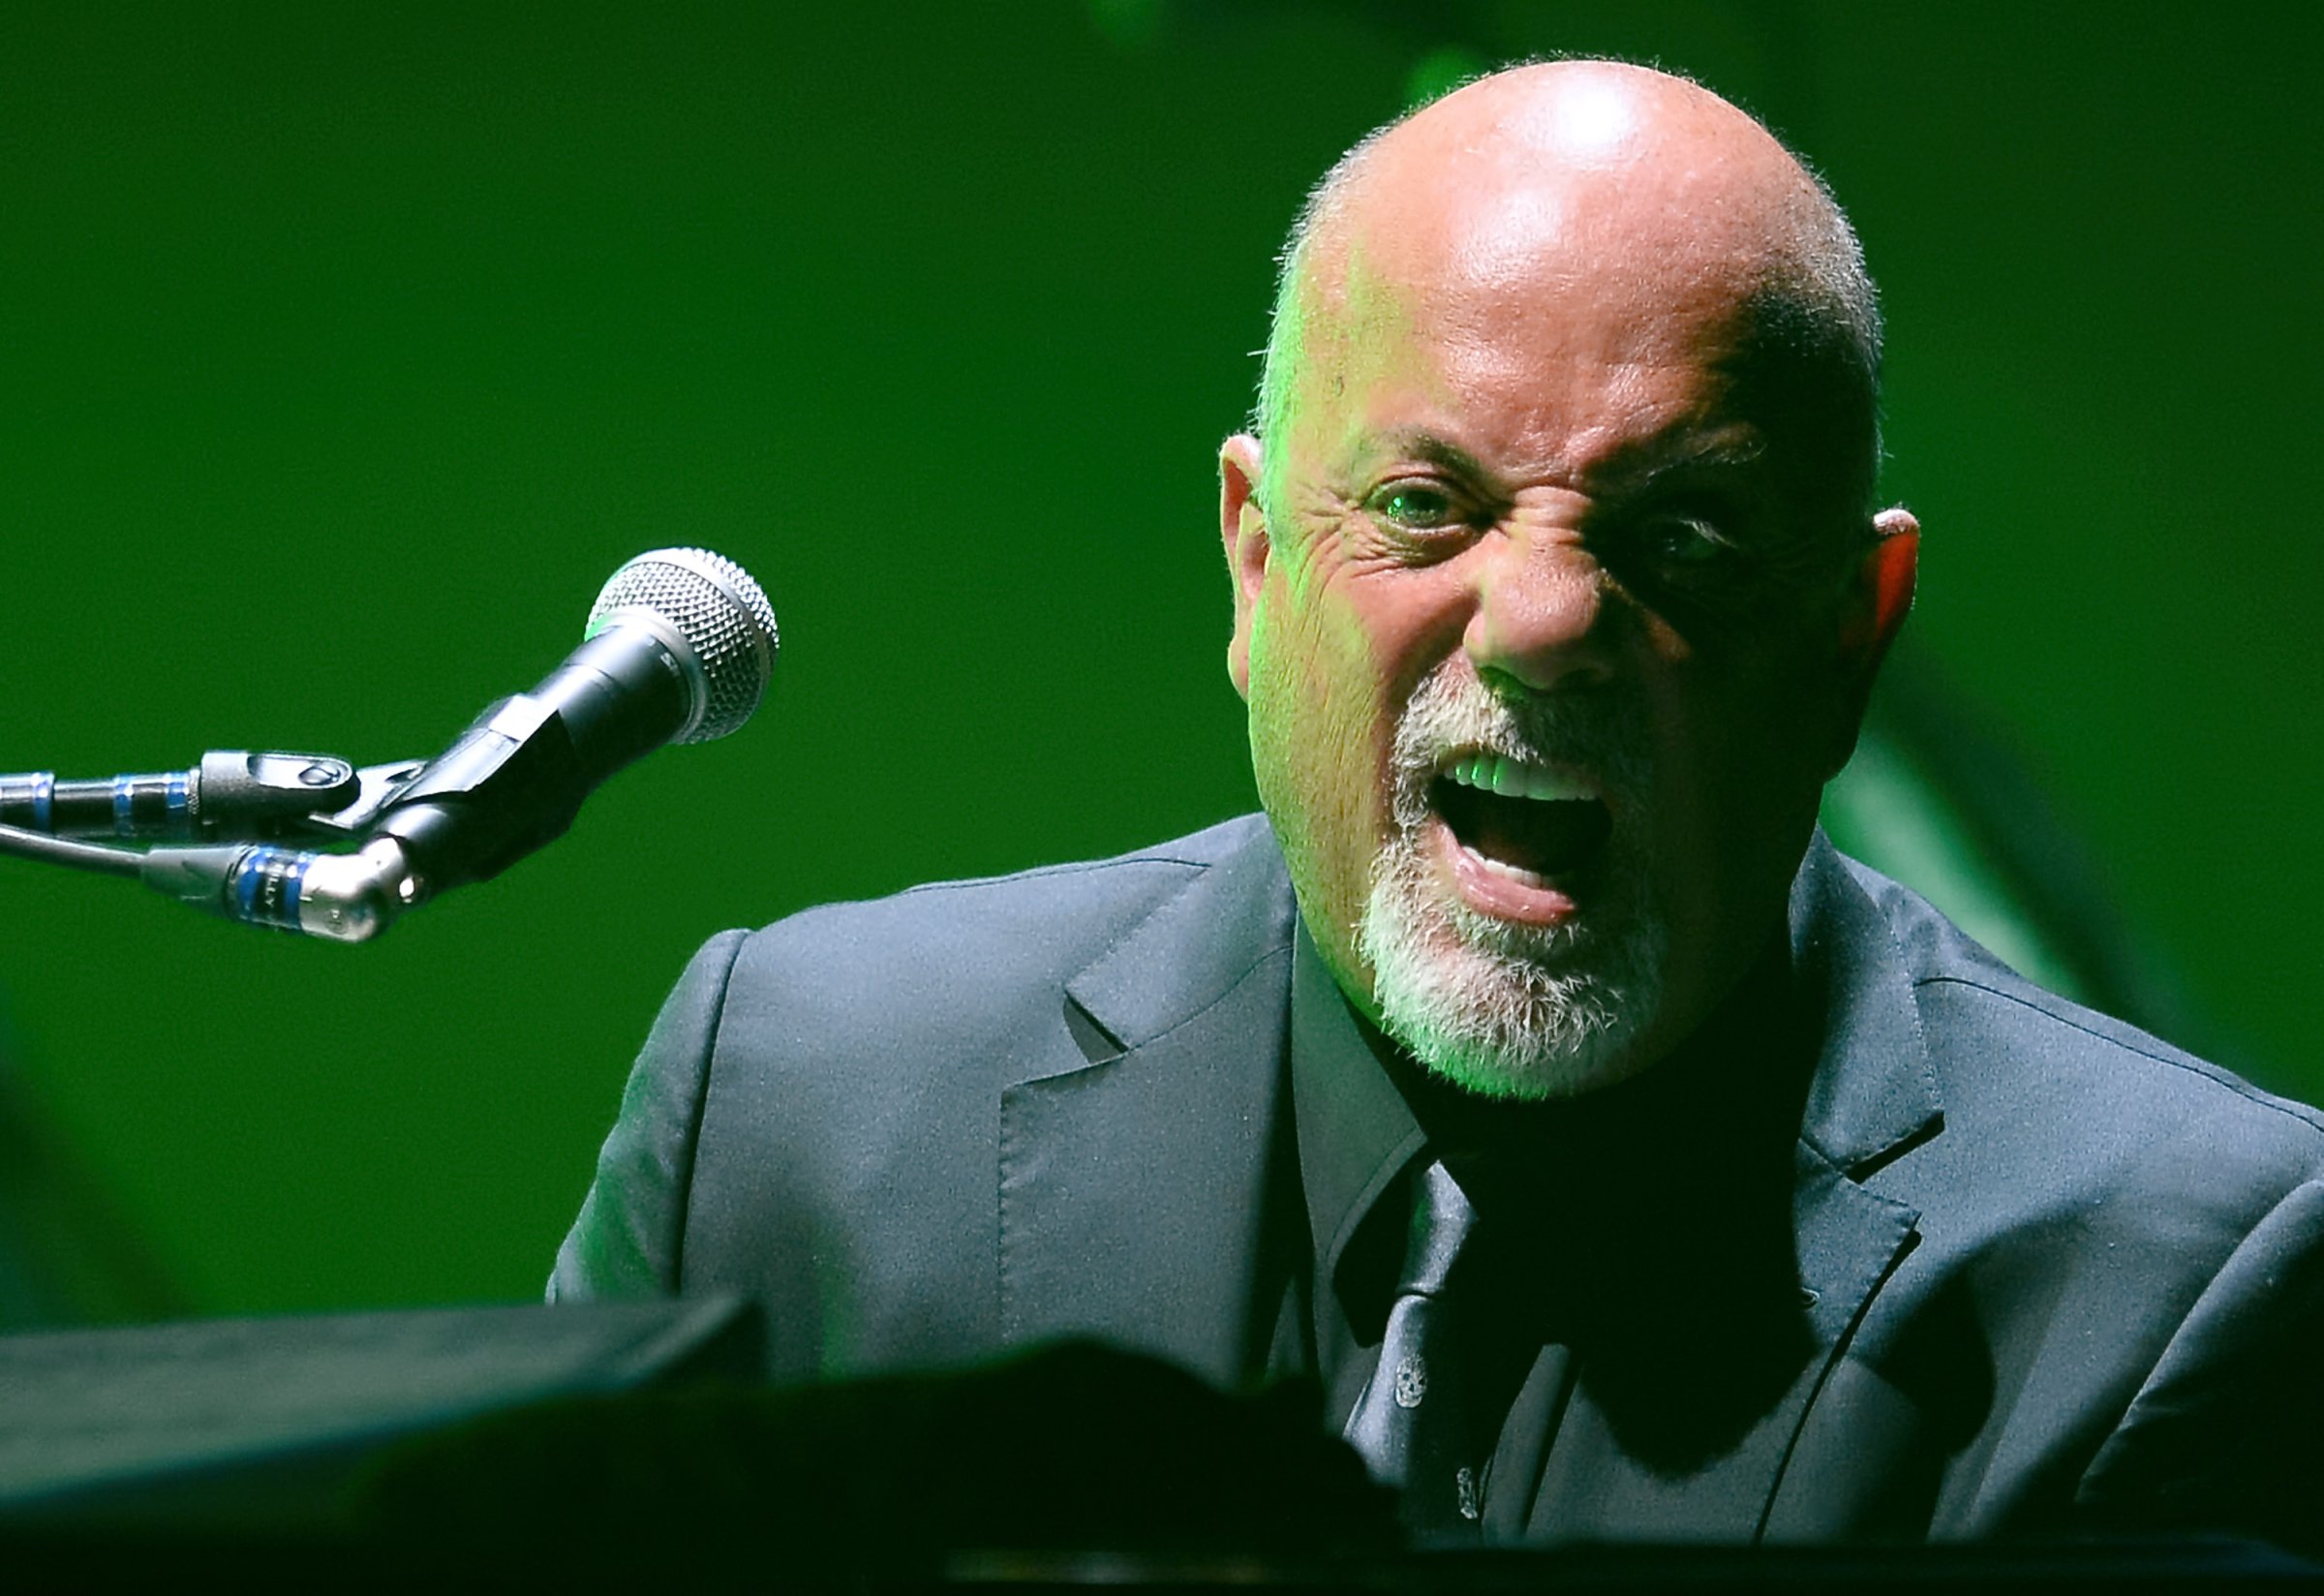 Billy Joel And Gavin DeGraw In Concert At The MGM Grand